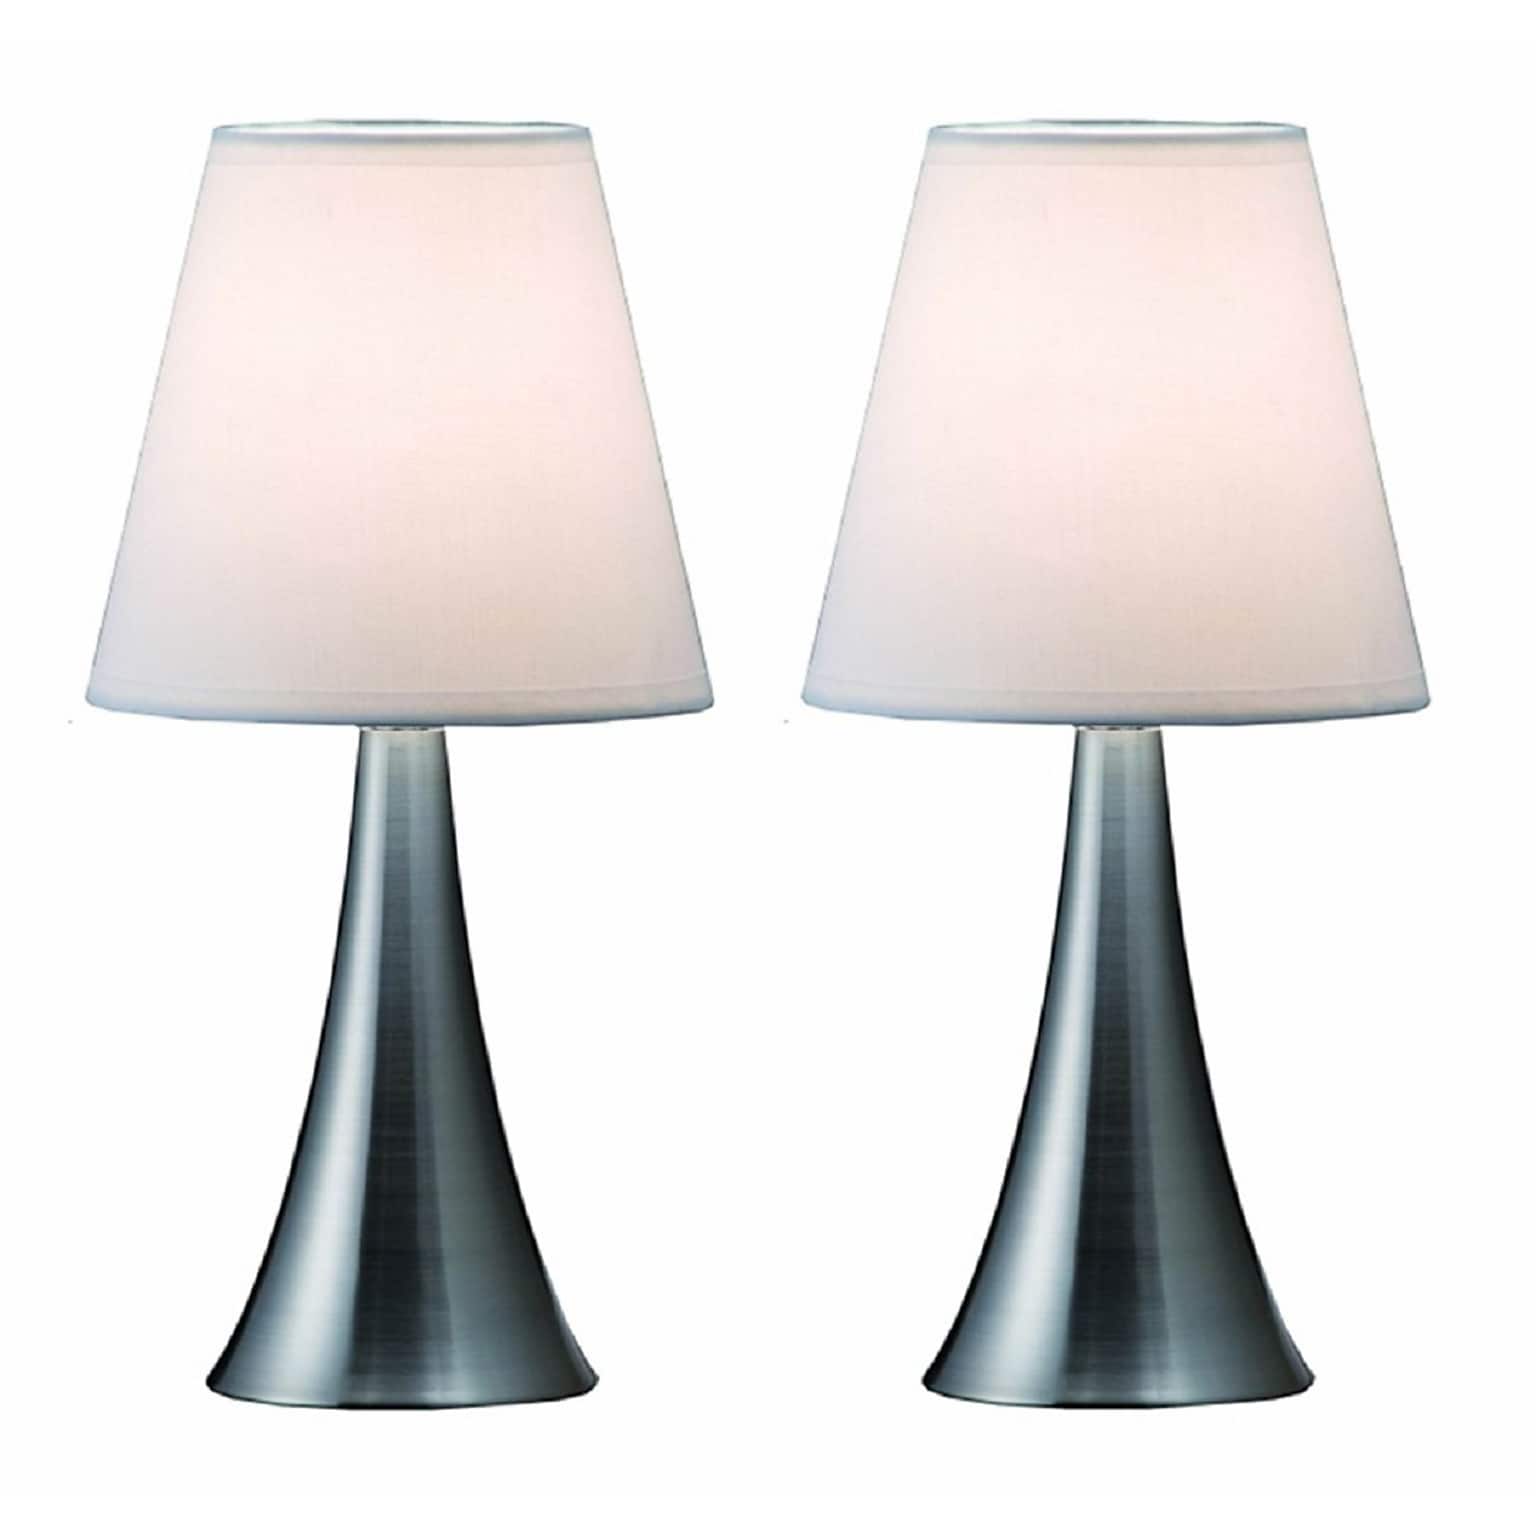 Simple Designs Two Pack Mini Touch Table Lamp Set With White Shade